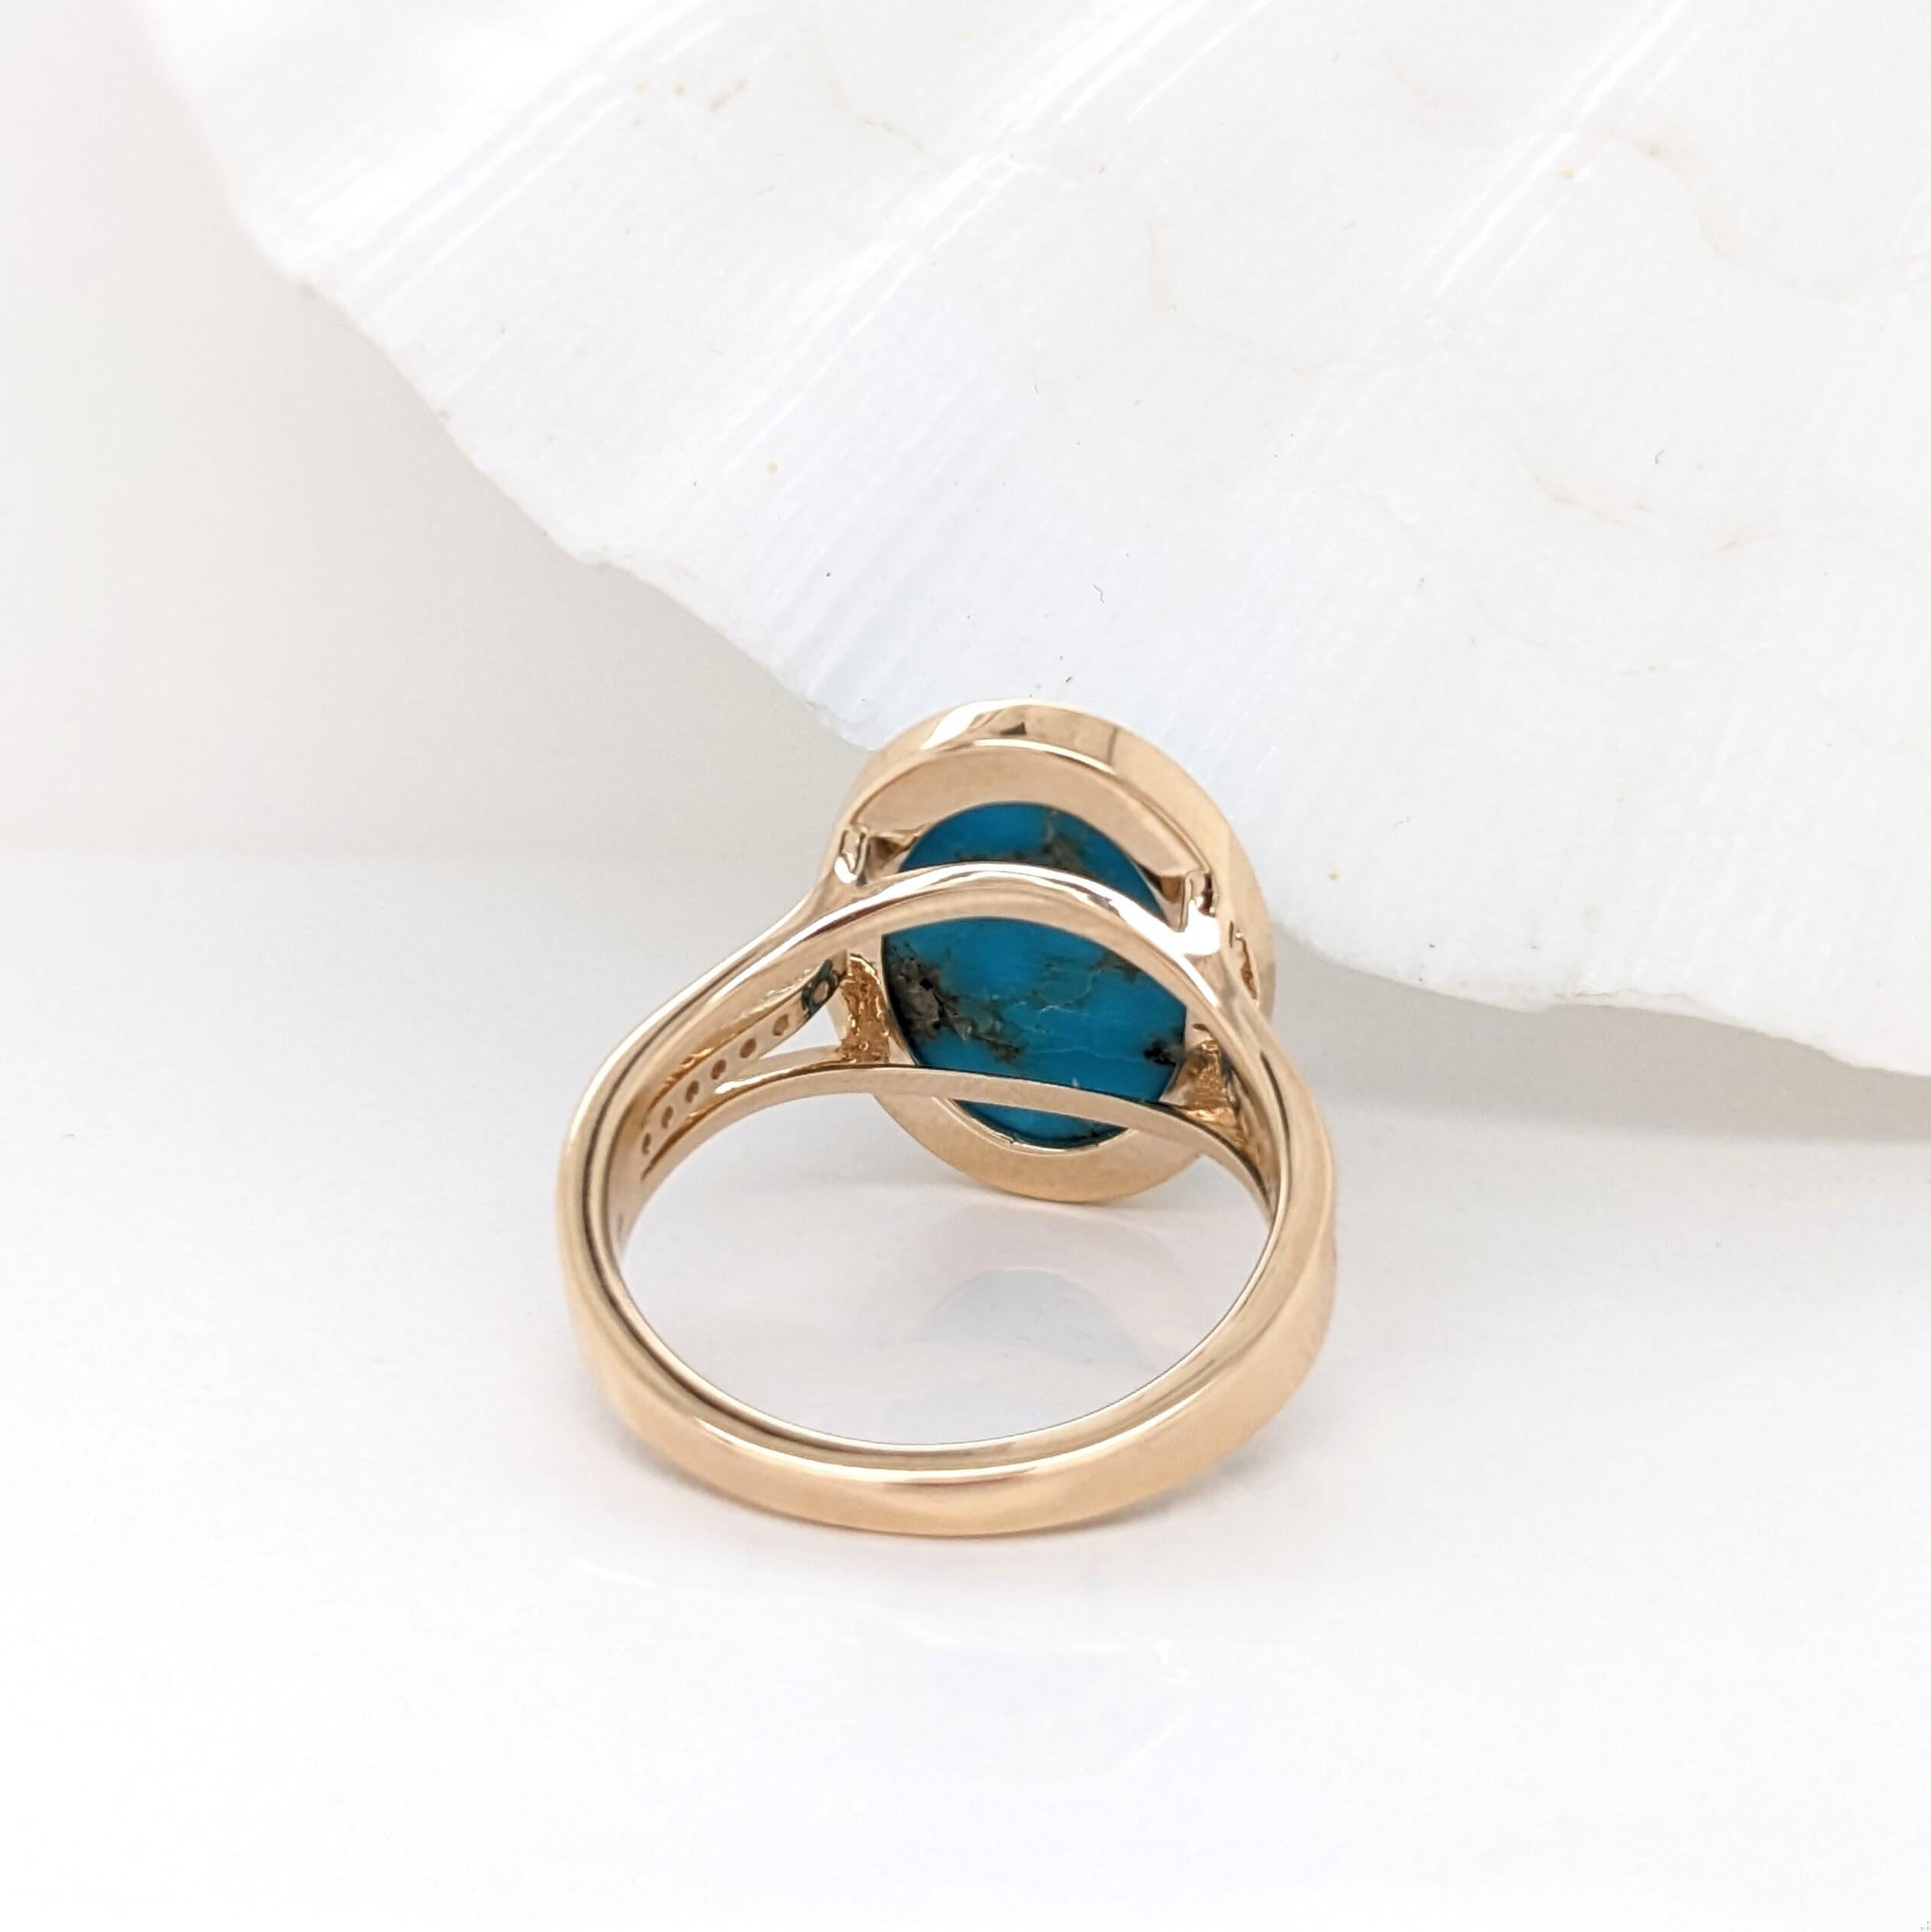 Oval Cut 6.3ct Sonoran Turquoise Ring w Earth Mined Diamonds in Solid 14K Gold Oval 16x12